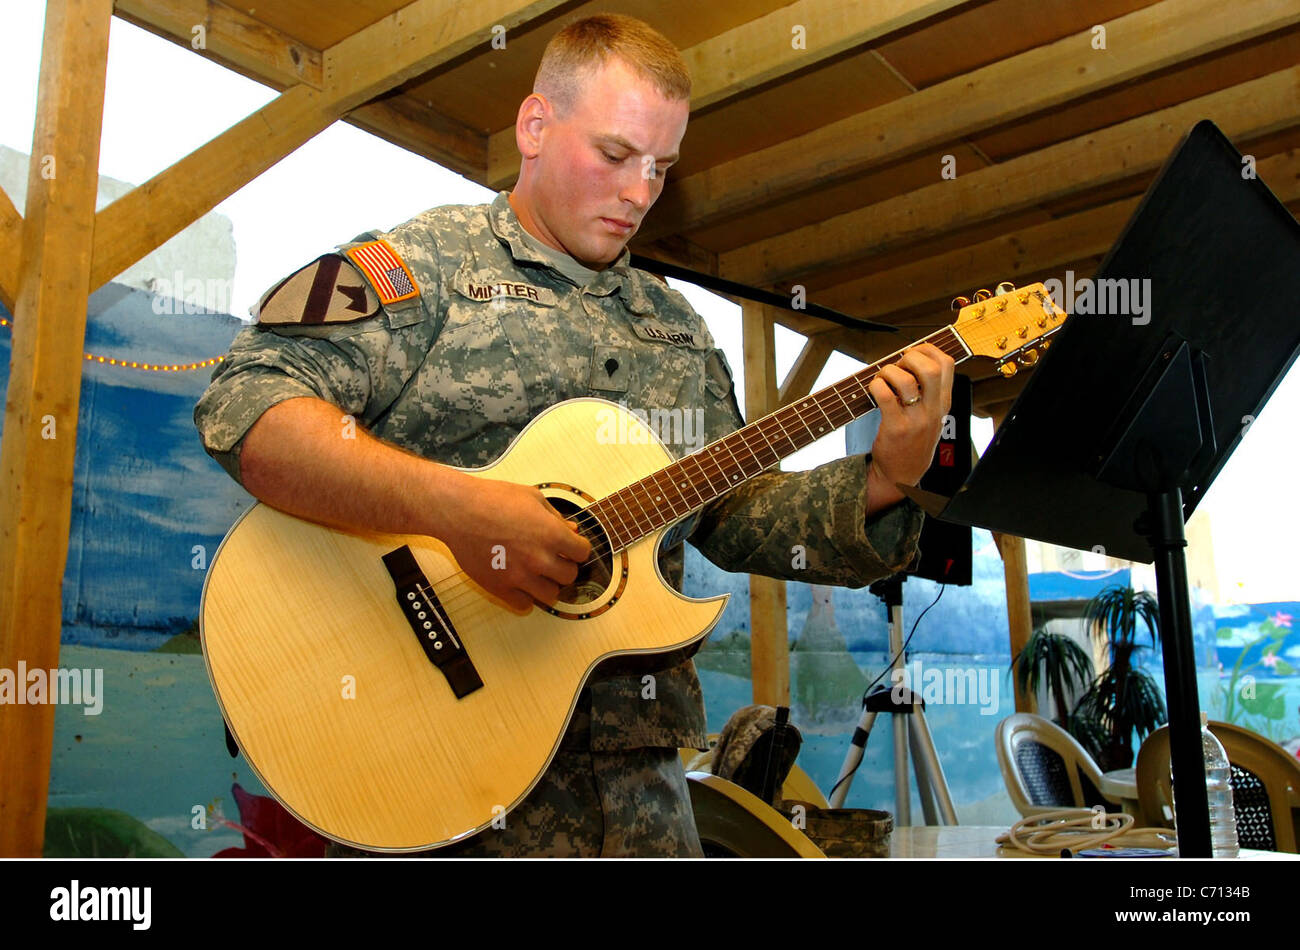 Waxahachie, Texas, native Spc. Thomas Minter, a wheeled vehicle mechanic for 615th Aviation Support Battalion, 1st Air Cavalry Brigade, 1st Cavalry Division, plays the guitar for the special music during a 9/11 prayer breakfast at Camp Taji, Iraq, Sept. 11. Among the special guests was Traverse City, Mich., native Col. Dan Shanahan, the commander of 1st ACB. (U.S. Army Photo by Spc. Nathan Hoskins, 1st ACB, 1st Cav. Div. Public Affairs) Stock Photo